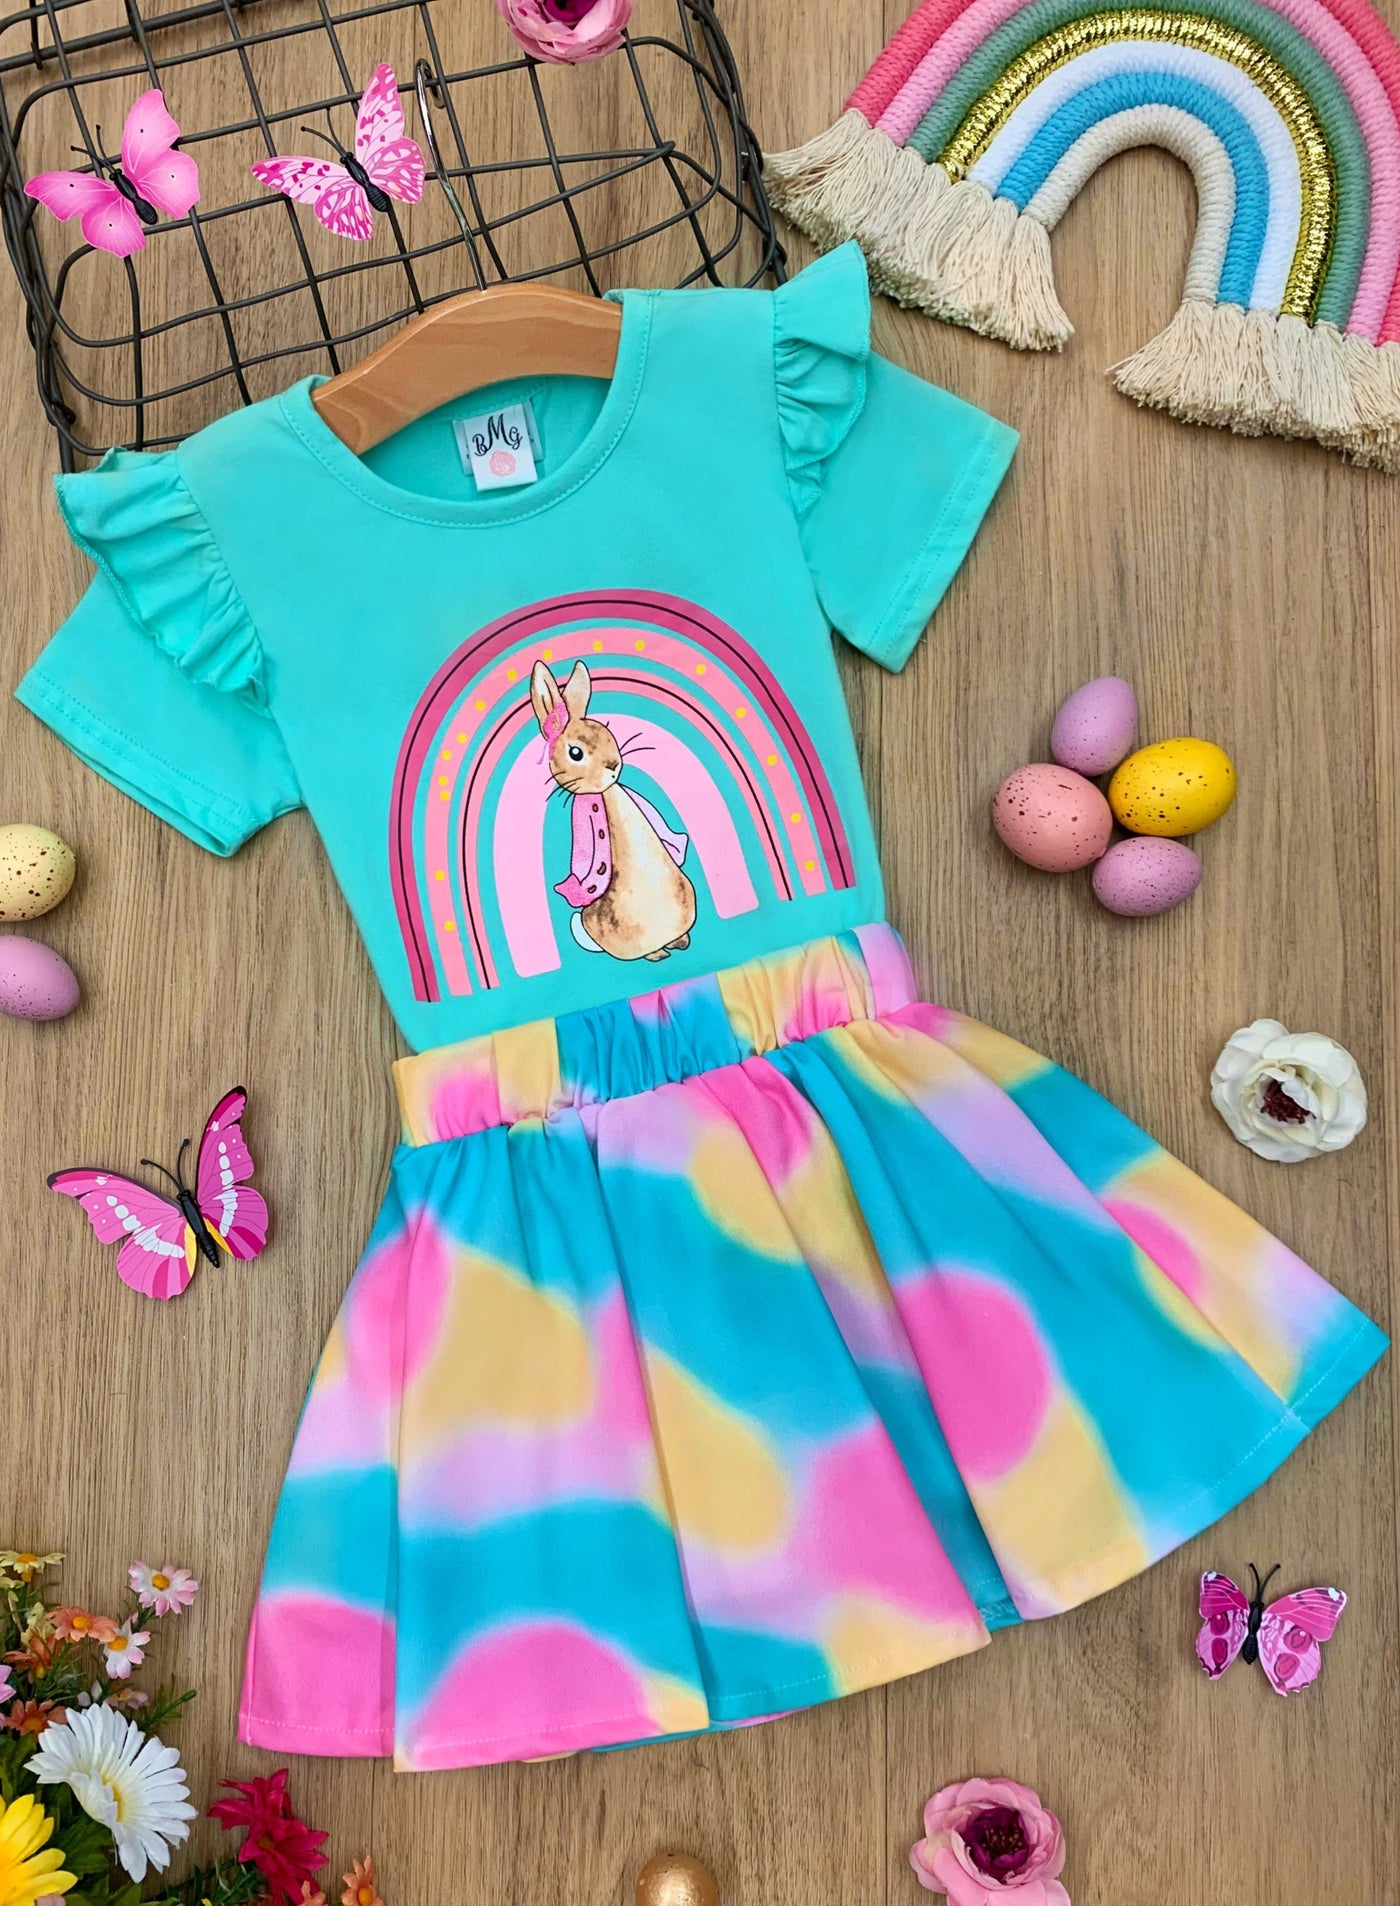 Features a mint ruffle shoulder, knot-hem top with a bunny and rainbow graphic design, and a vibrant multicolor skirt for 2T to 10Y toddlers and girls